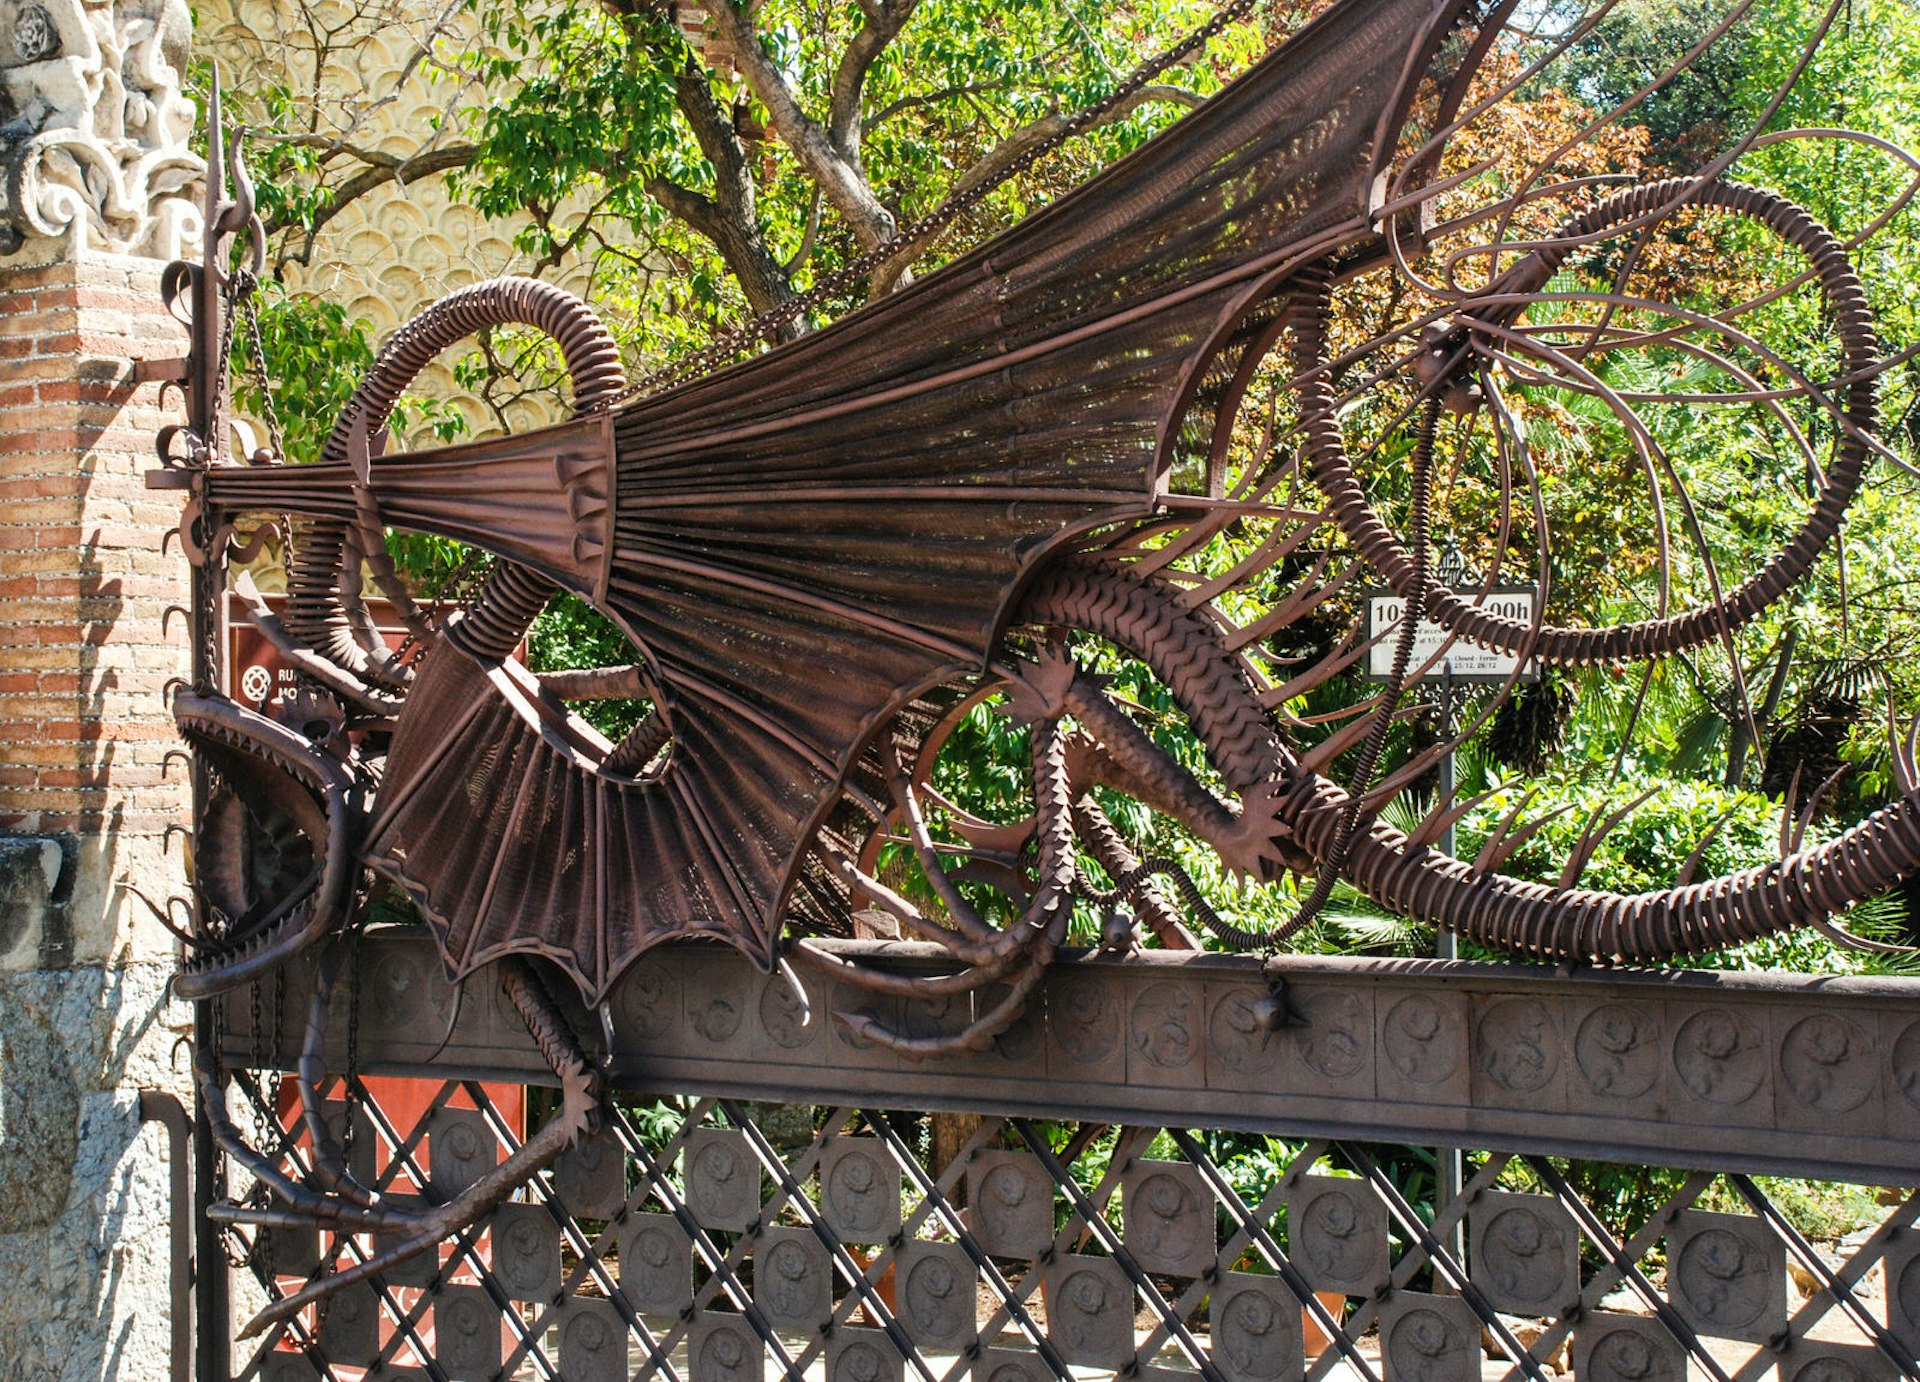 A close-up of Gaudí's intricate, fantastical wrought-iron dragon gate, embellished with likenesses of dragons. 